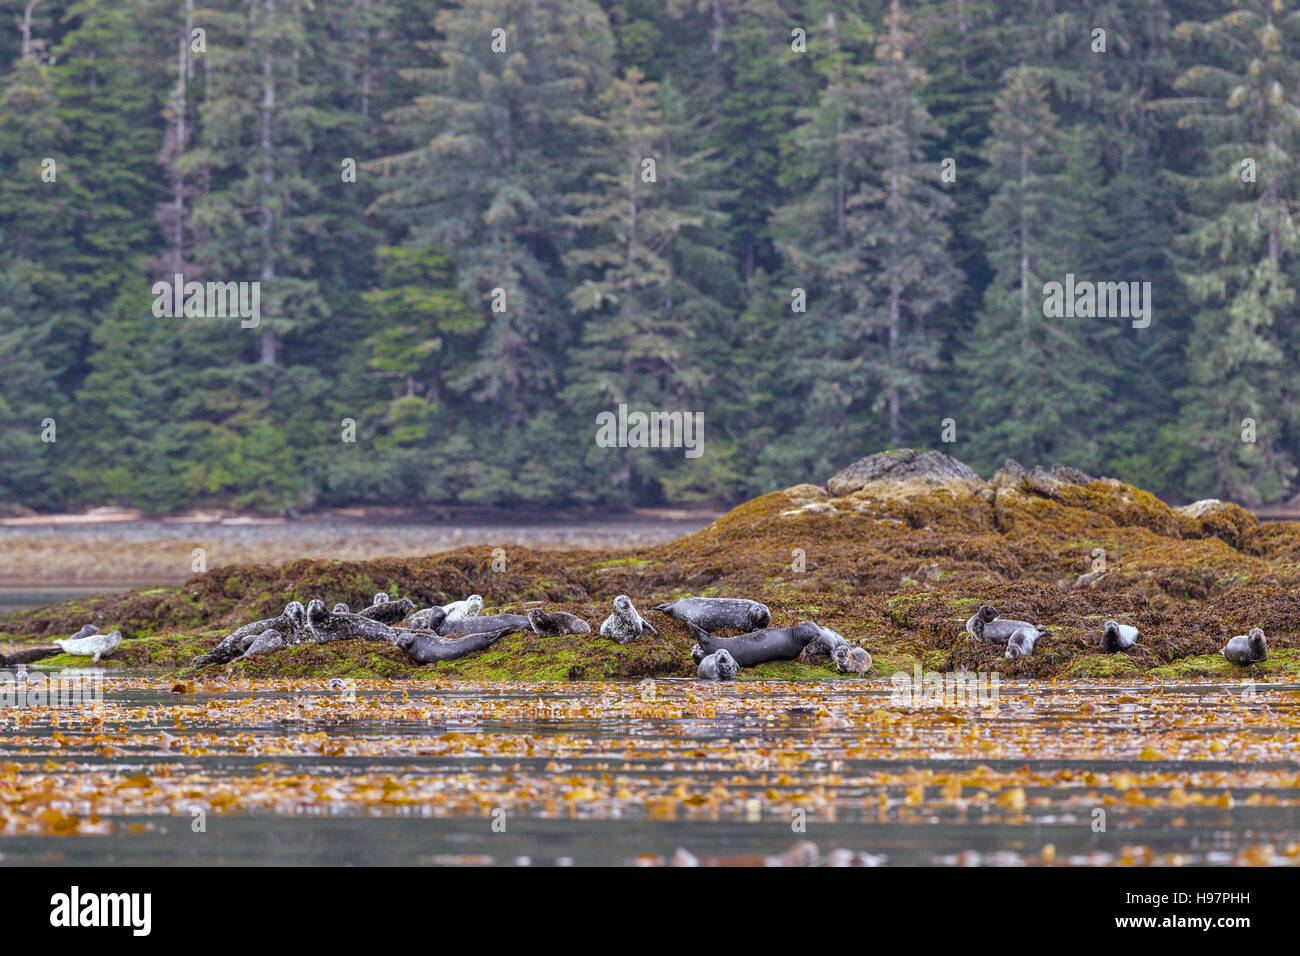 A colony of Harbor seal (Phoca vitulina) hauled-out to rest on seaweed covered rocks on the shore of Tongass National Forest, Alaska Stock Photo